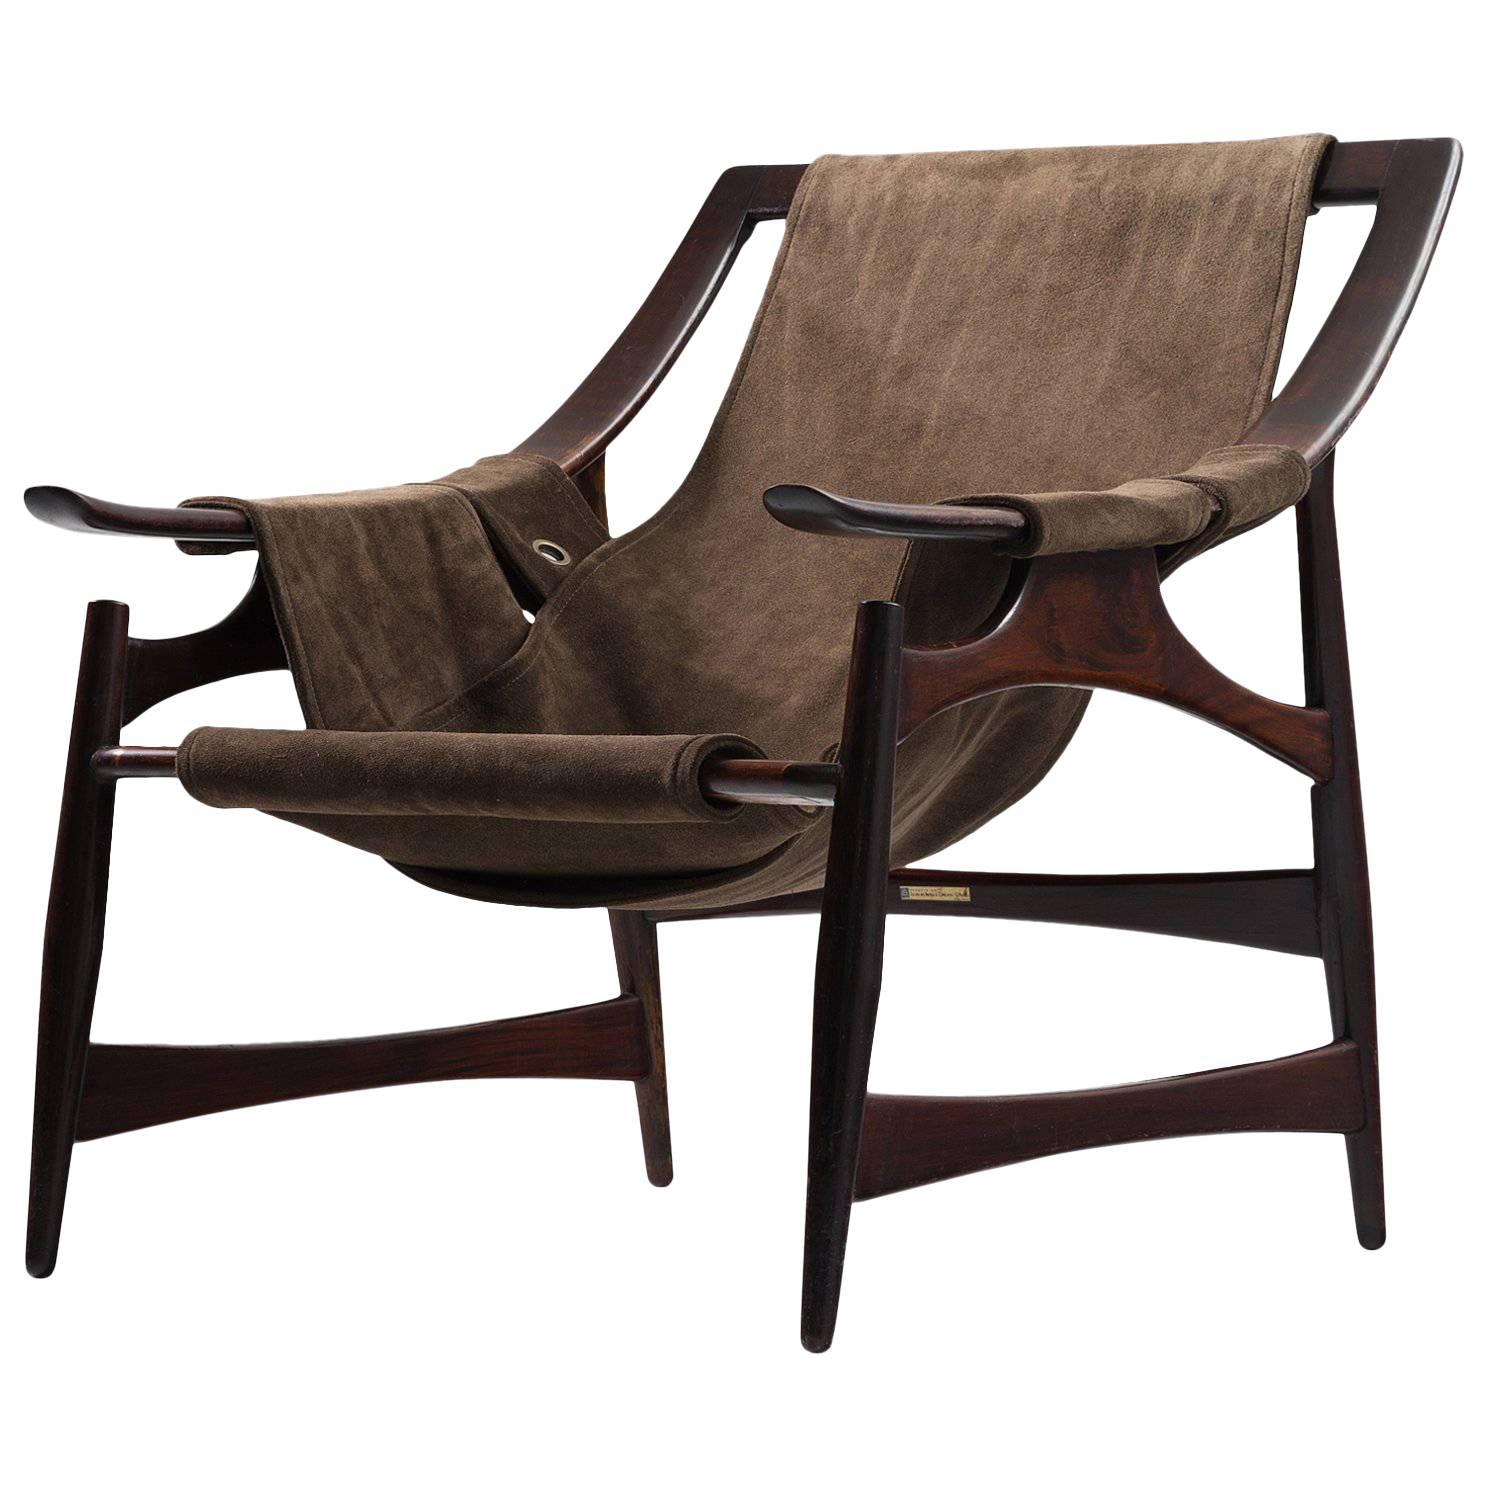 Liceu De Artes Sao Paulo Lounge Chair in Rosewood and Brown Suede